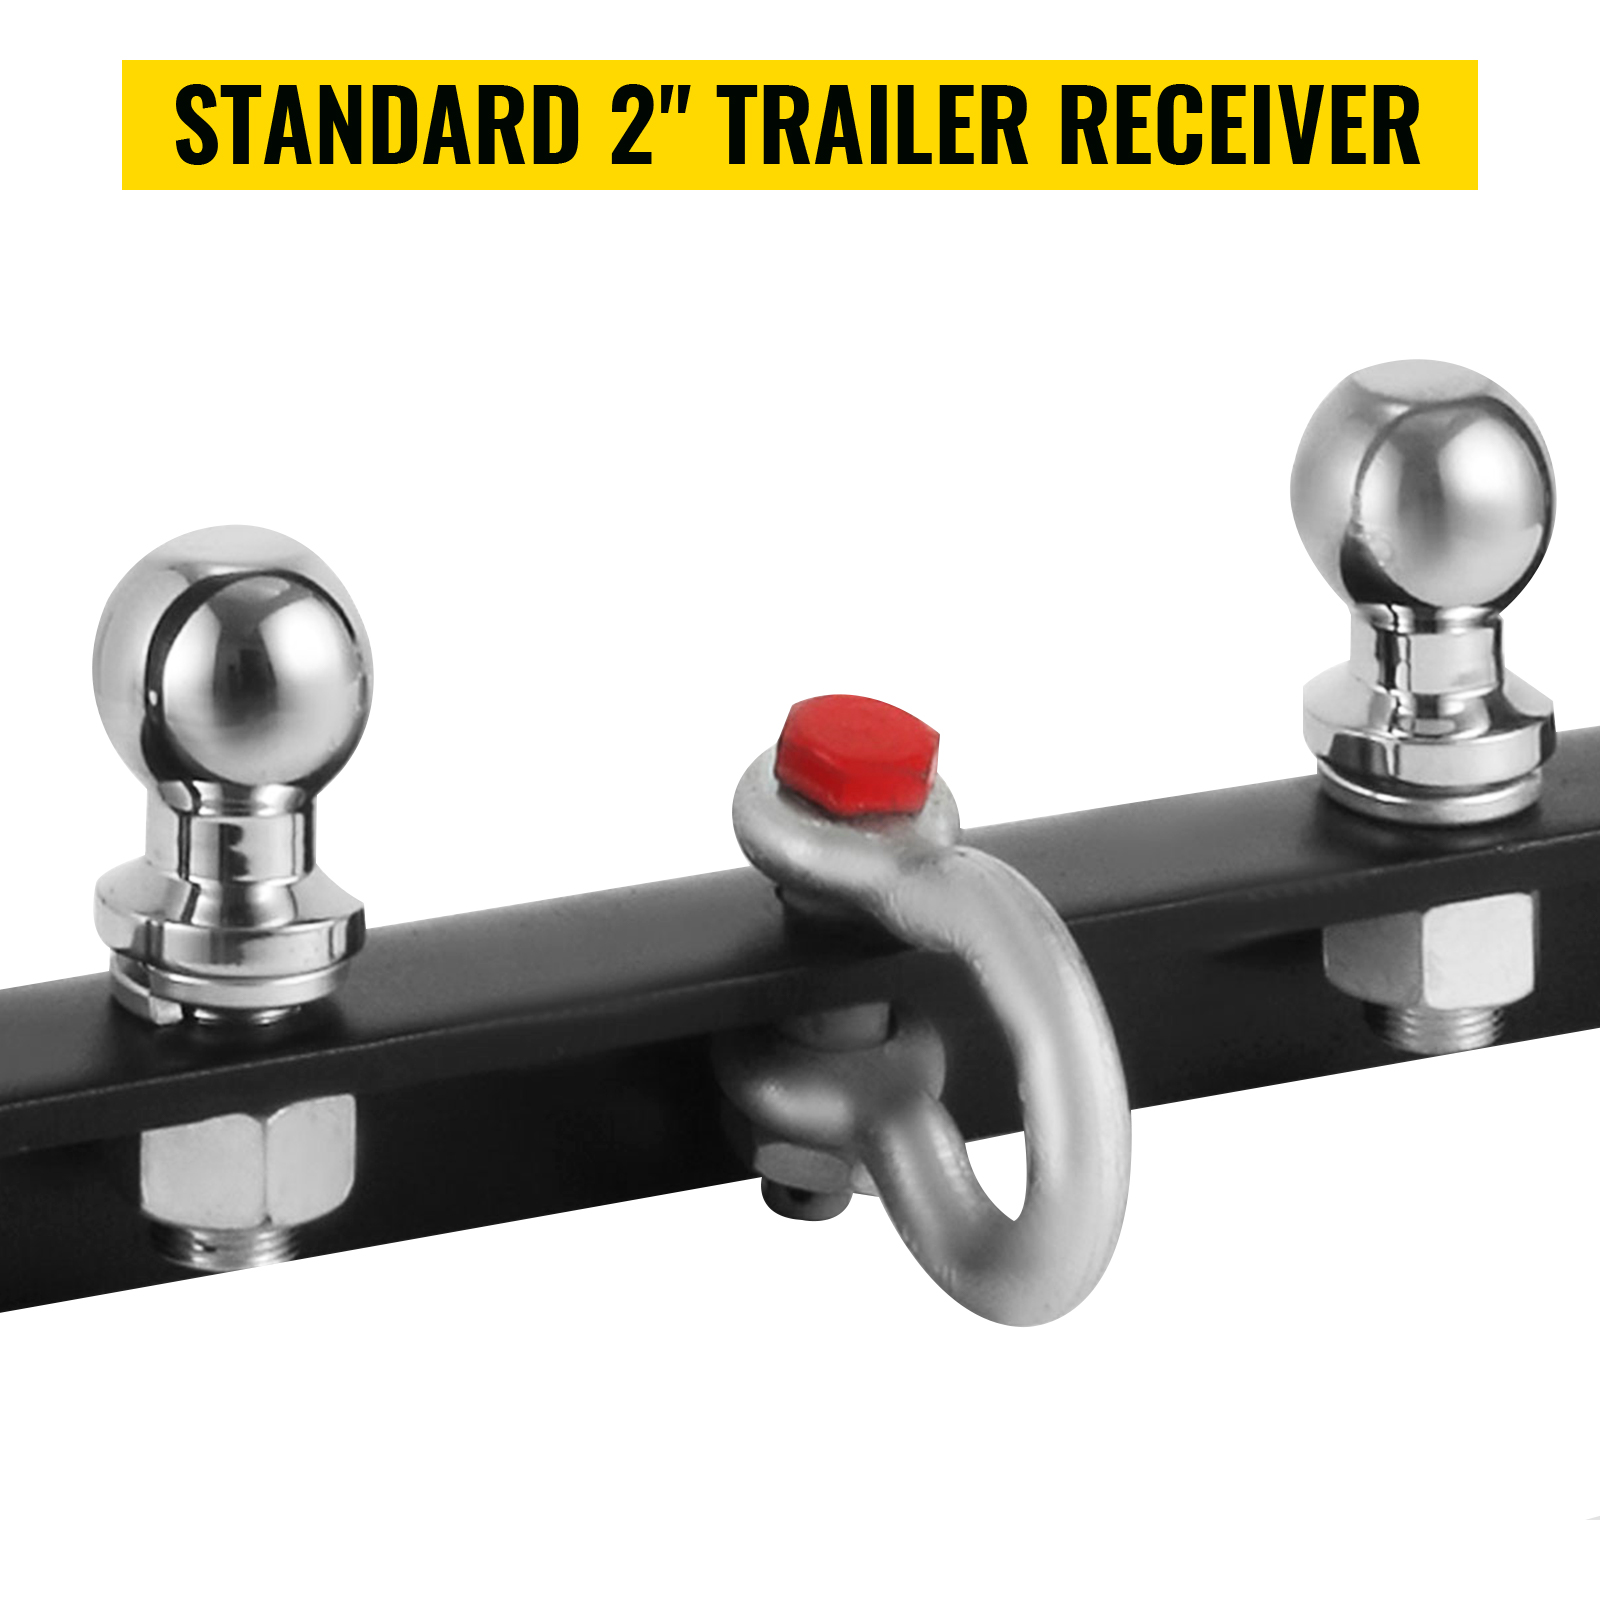 Trailer Hitch, Ball hitch for tractor